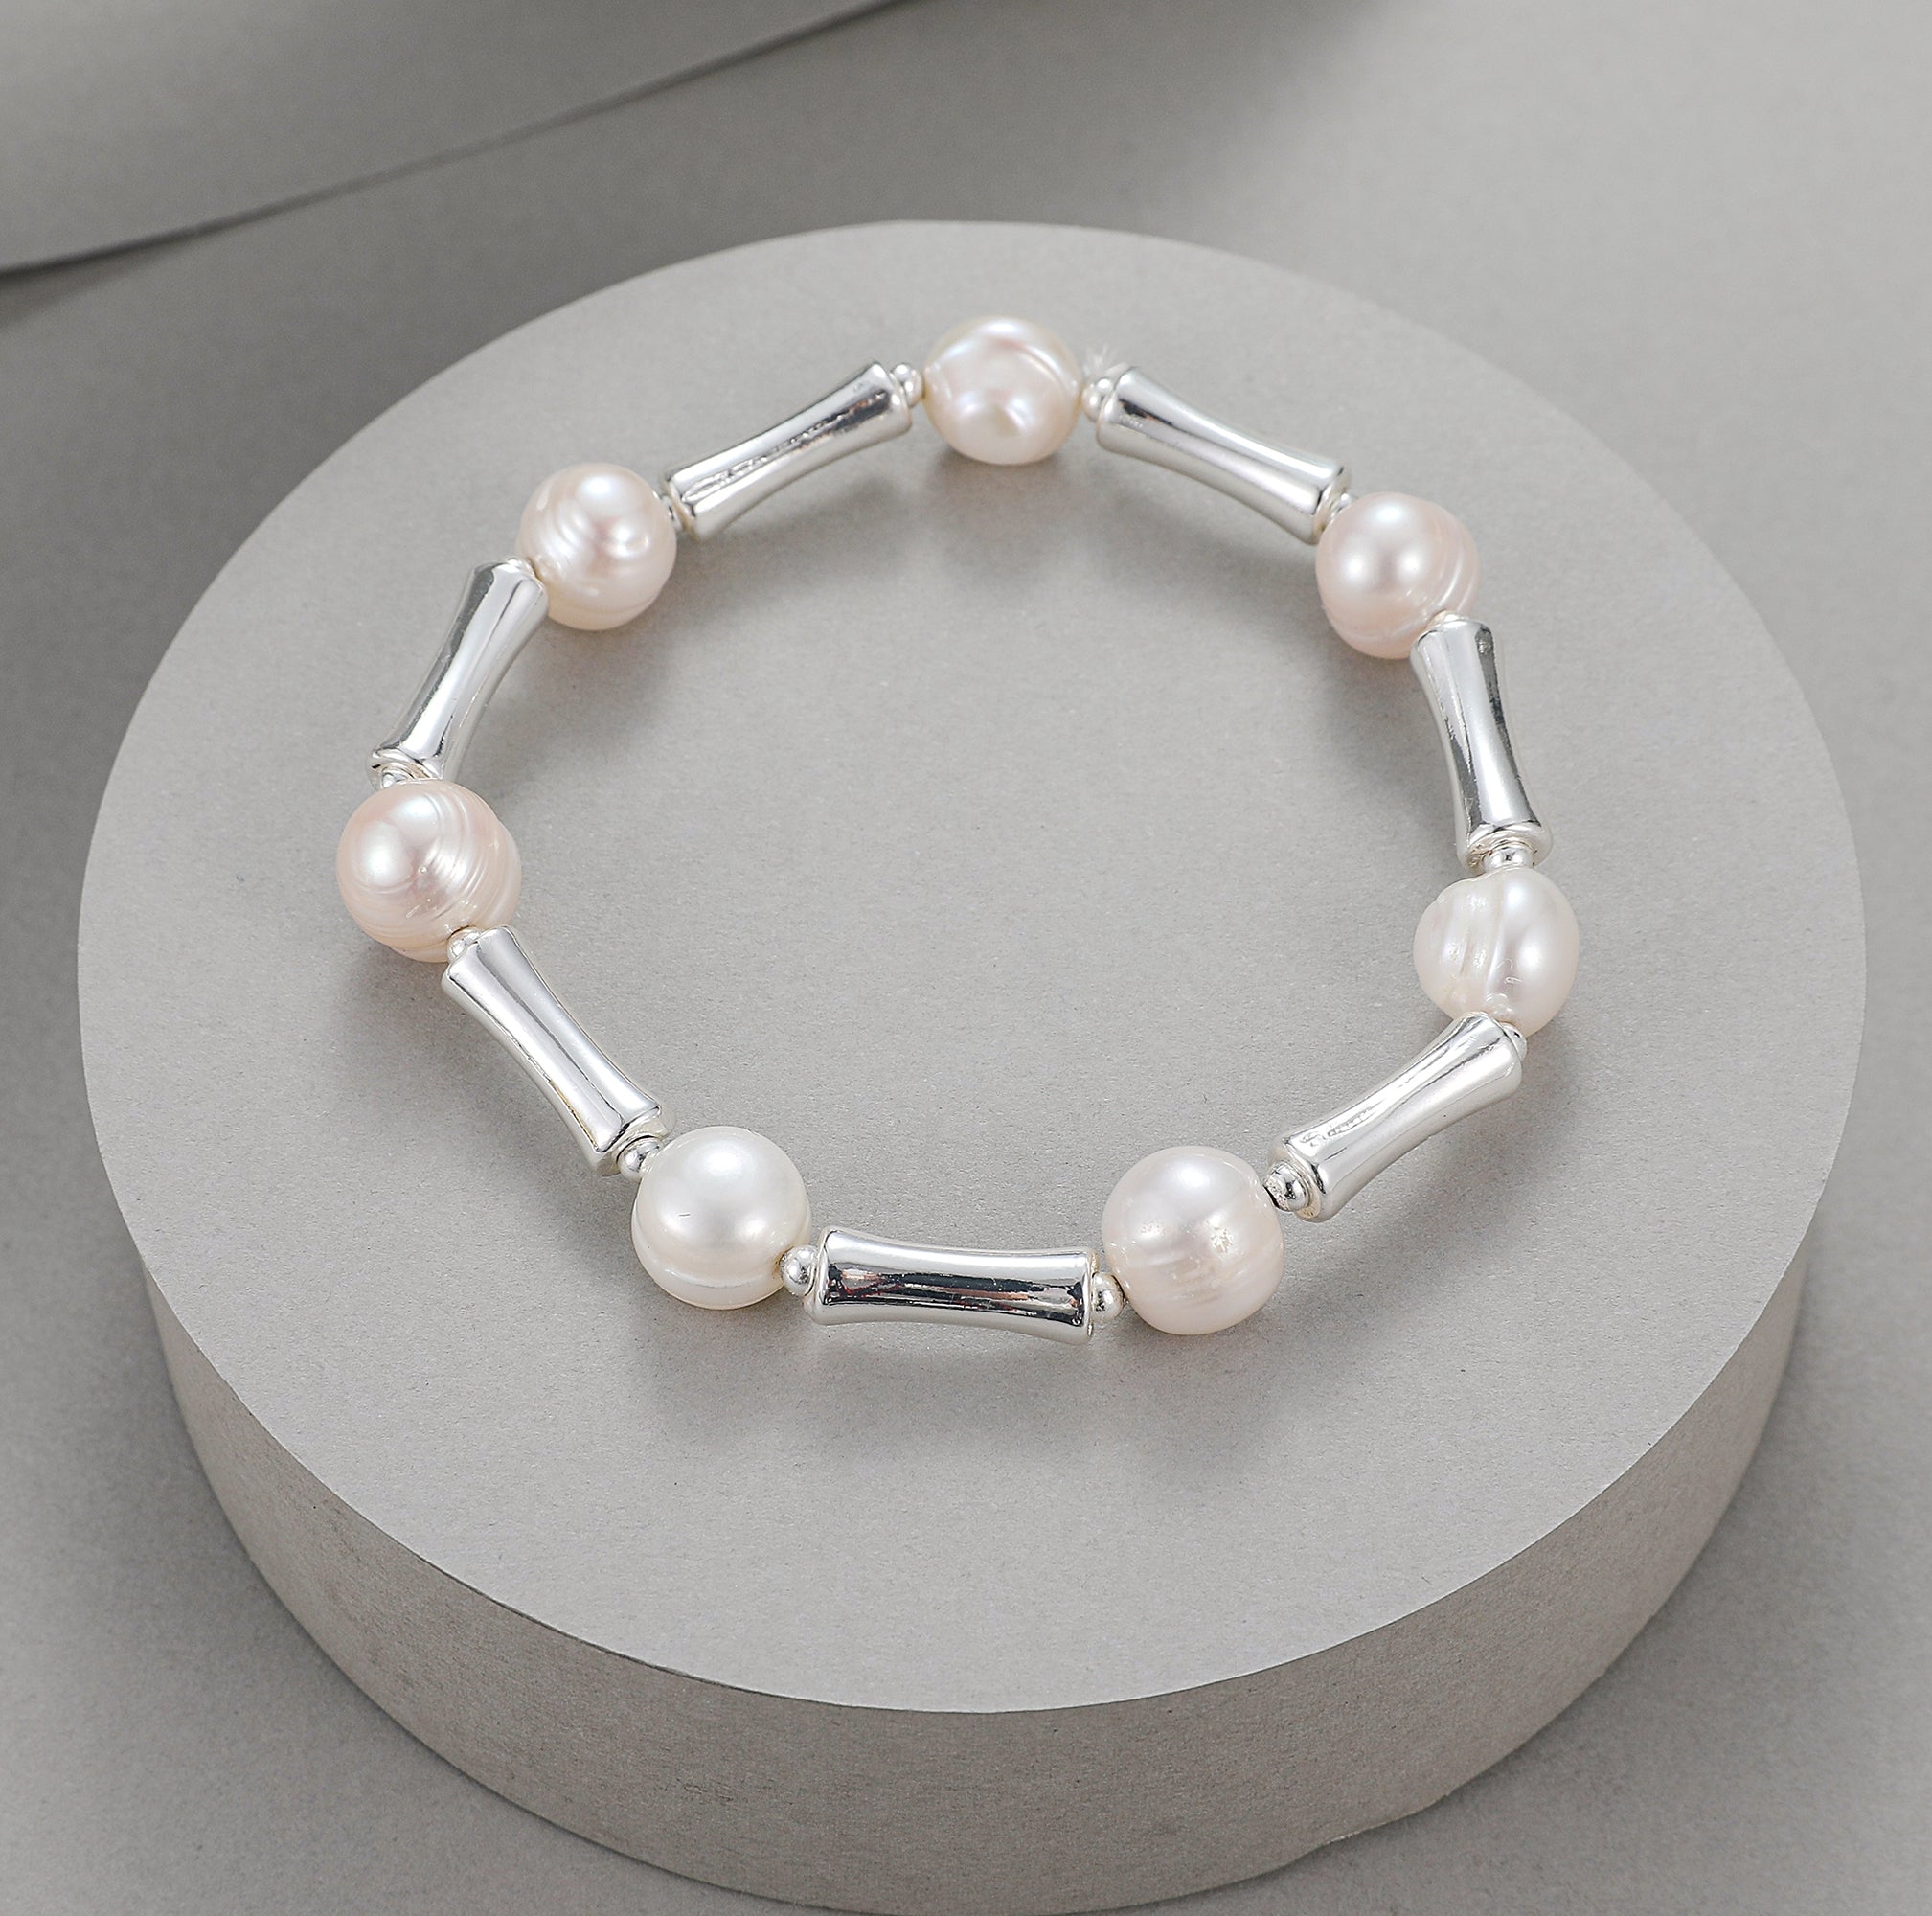 Mother of pearl elasticated bracelet with silver stations